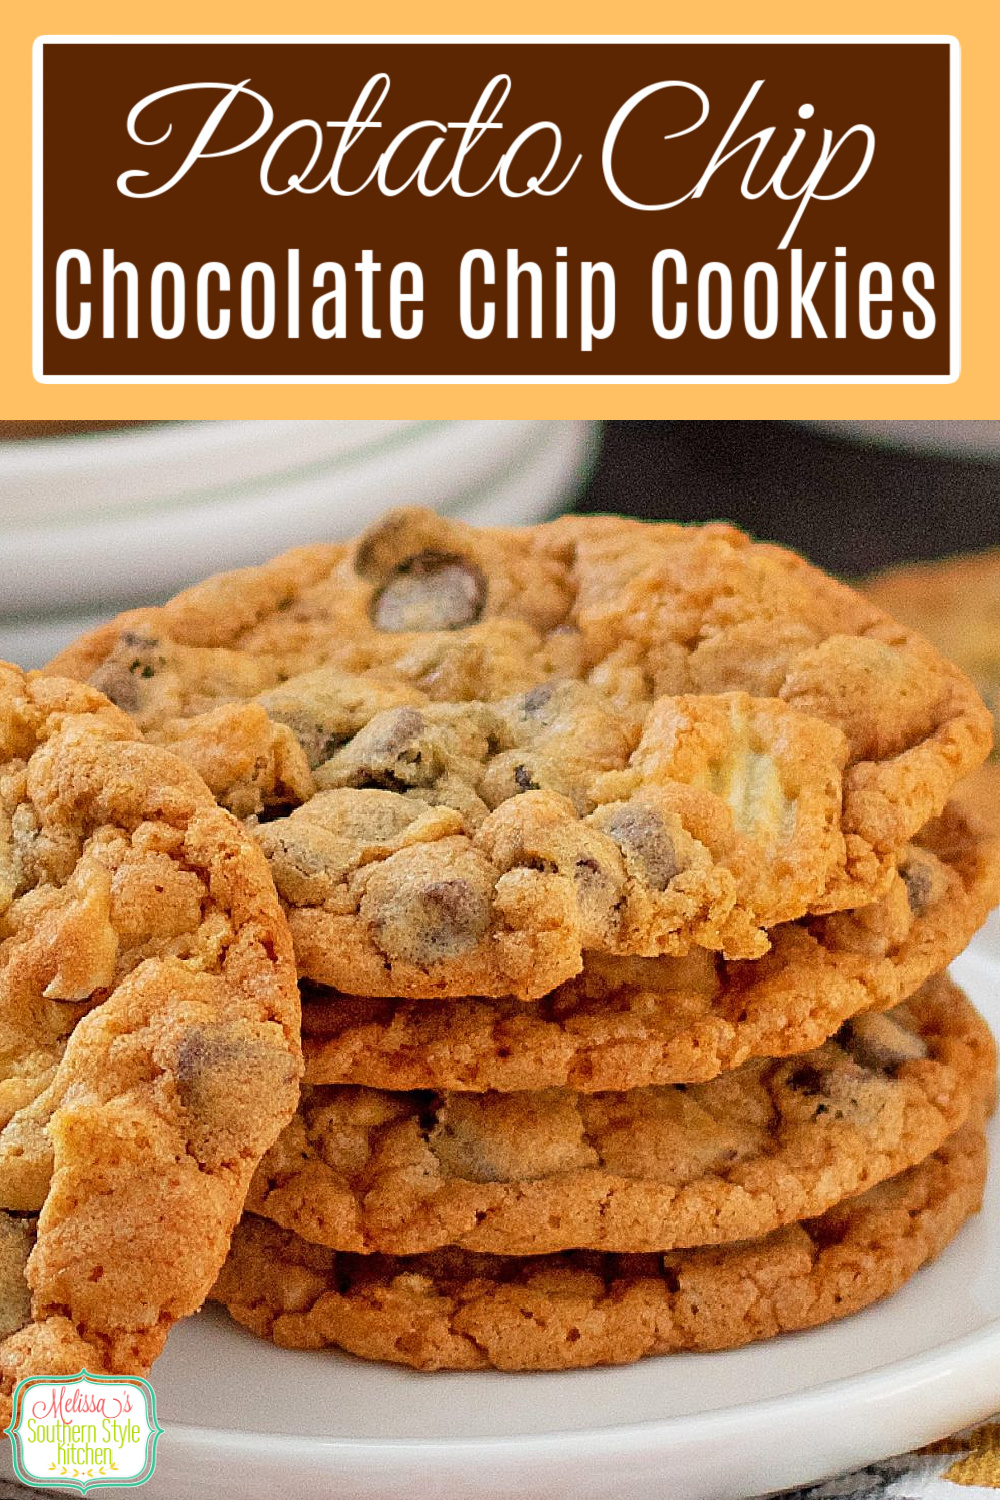 These Potato Chip Chocolate Chip Cookies feature that sweet and salty flavor combination that makes them impossible to resist! #potatochipcookies #cookierecipes #chocolatechipcookies #cookierecipes #christmascookies via @melissasssk